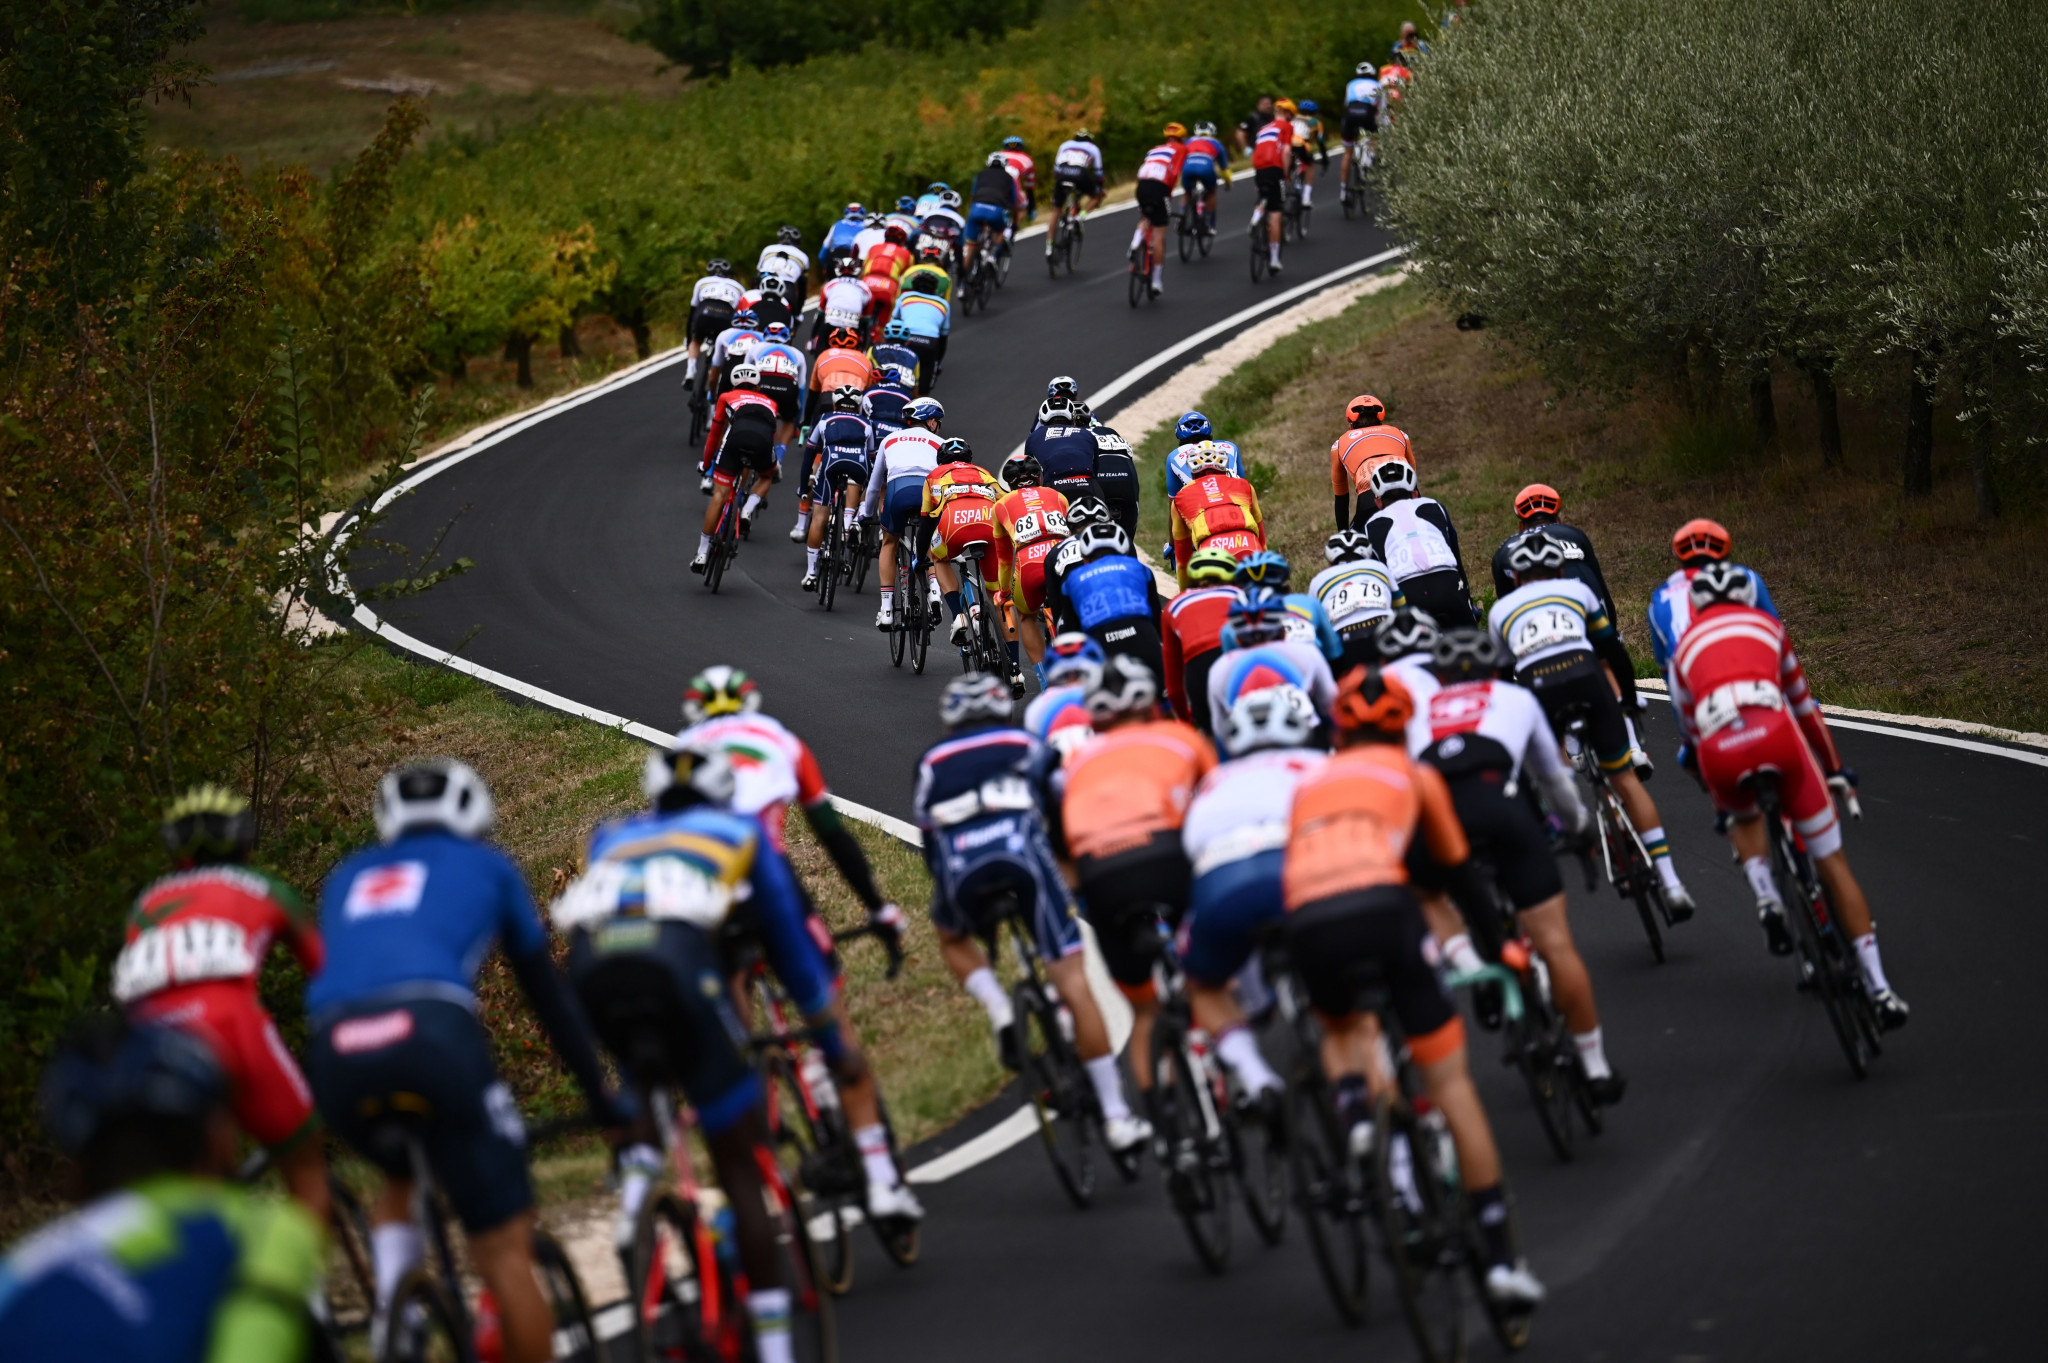 Imola in Italy stepping to host the UCI Road World Championships at late notice ©Getty Images